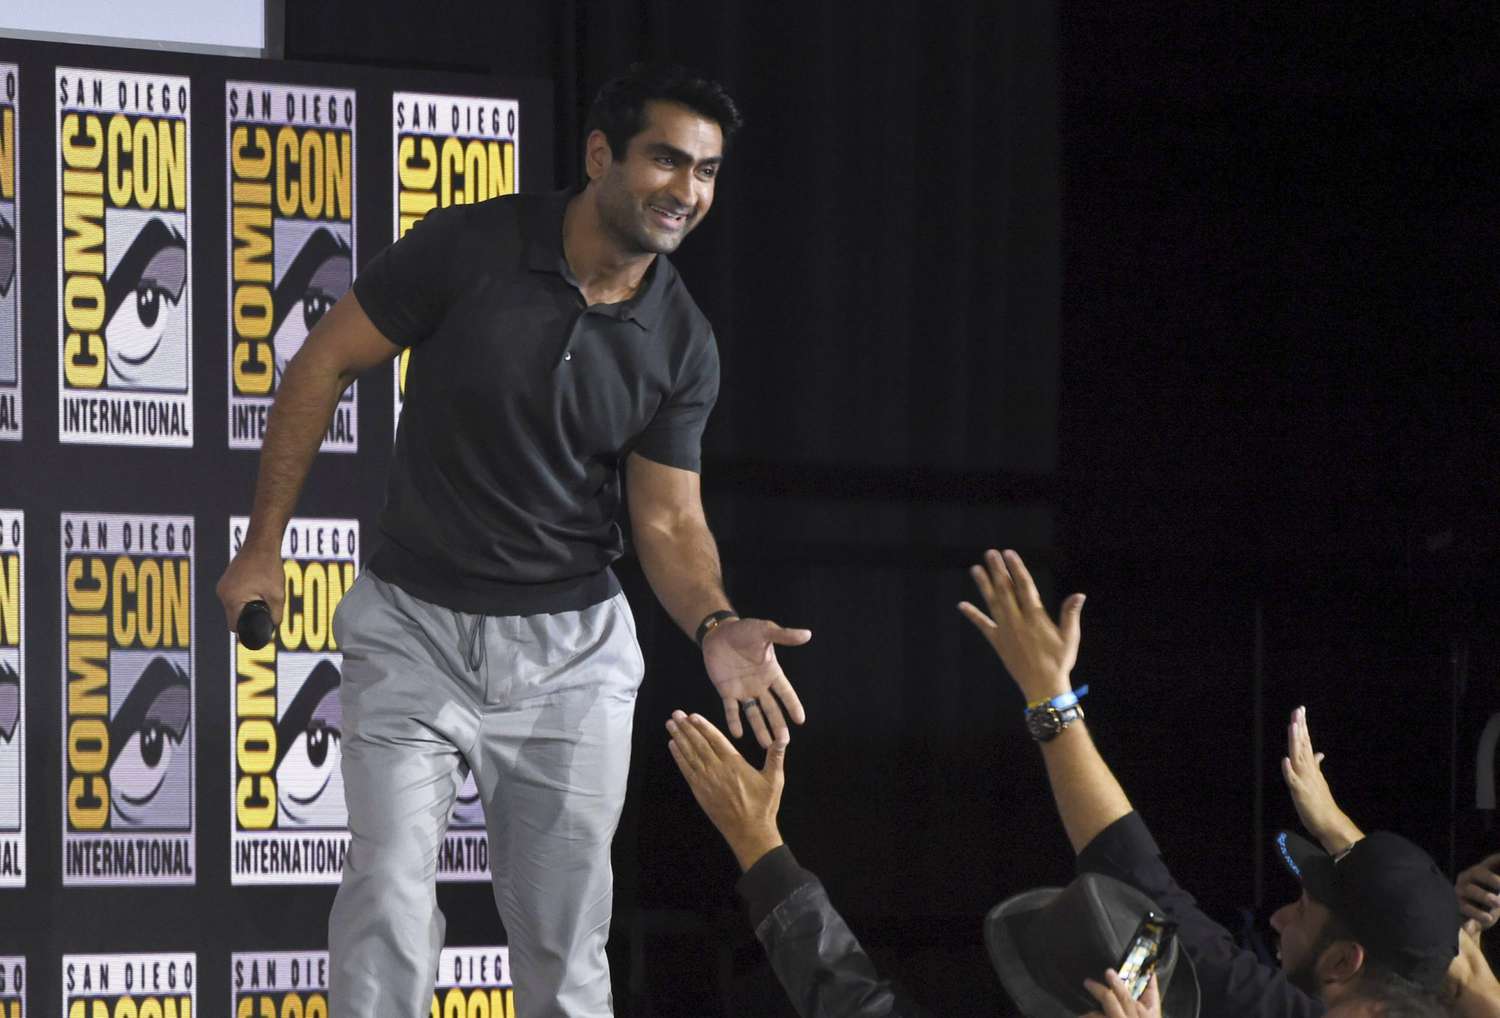 Mandatory Credit: Photo by Chris Pizzello/Invision/AP/Shutterstock (10342690e) Kumail Nanjiani greets fans at the Marvel Studios panel on day three of Comic-Con International, in San Diego 2019 Comic-Con - Marvel Studios, San Diego, USA - 20 Jul 2019